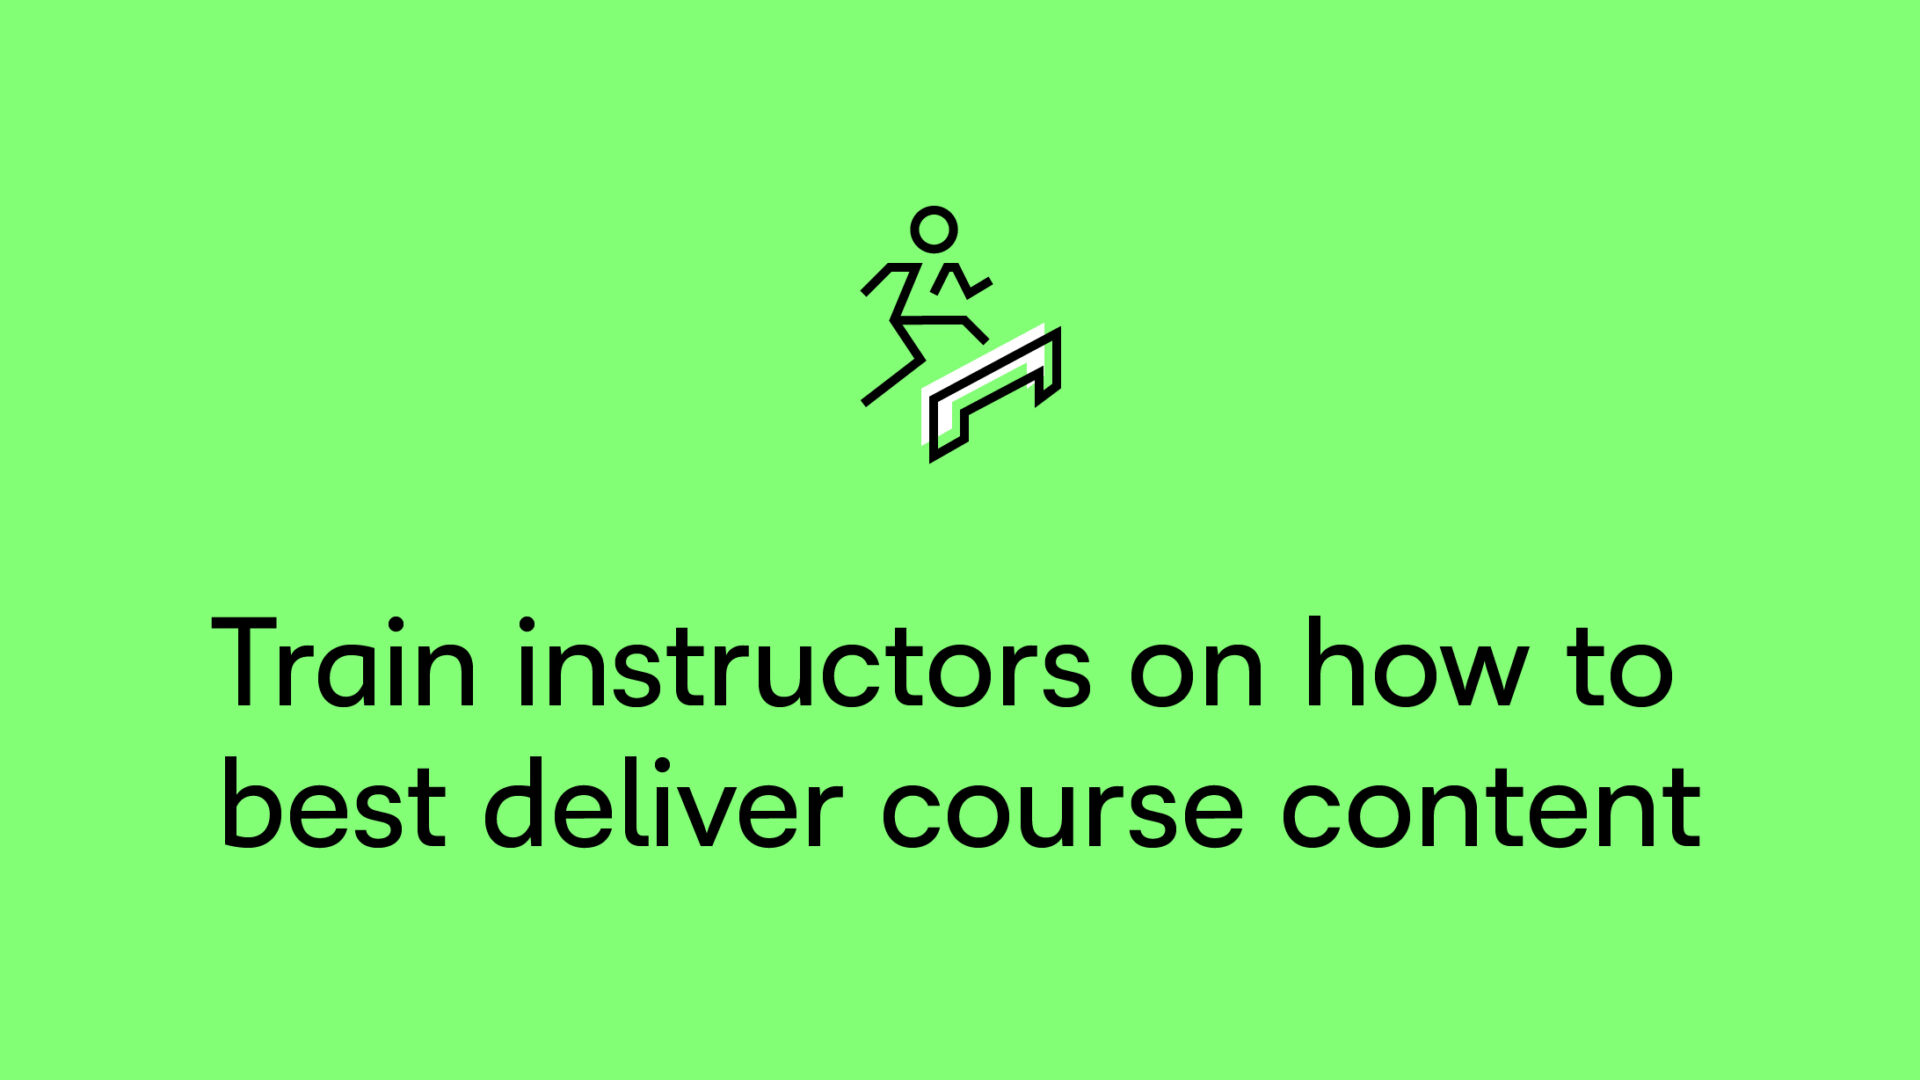 Train instructors on how to best deliver course content